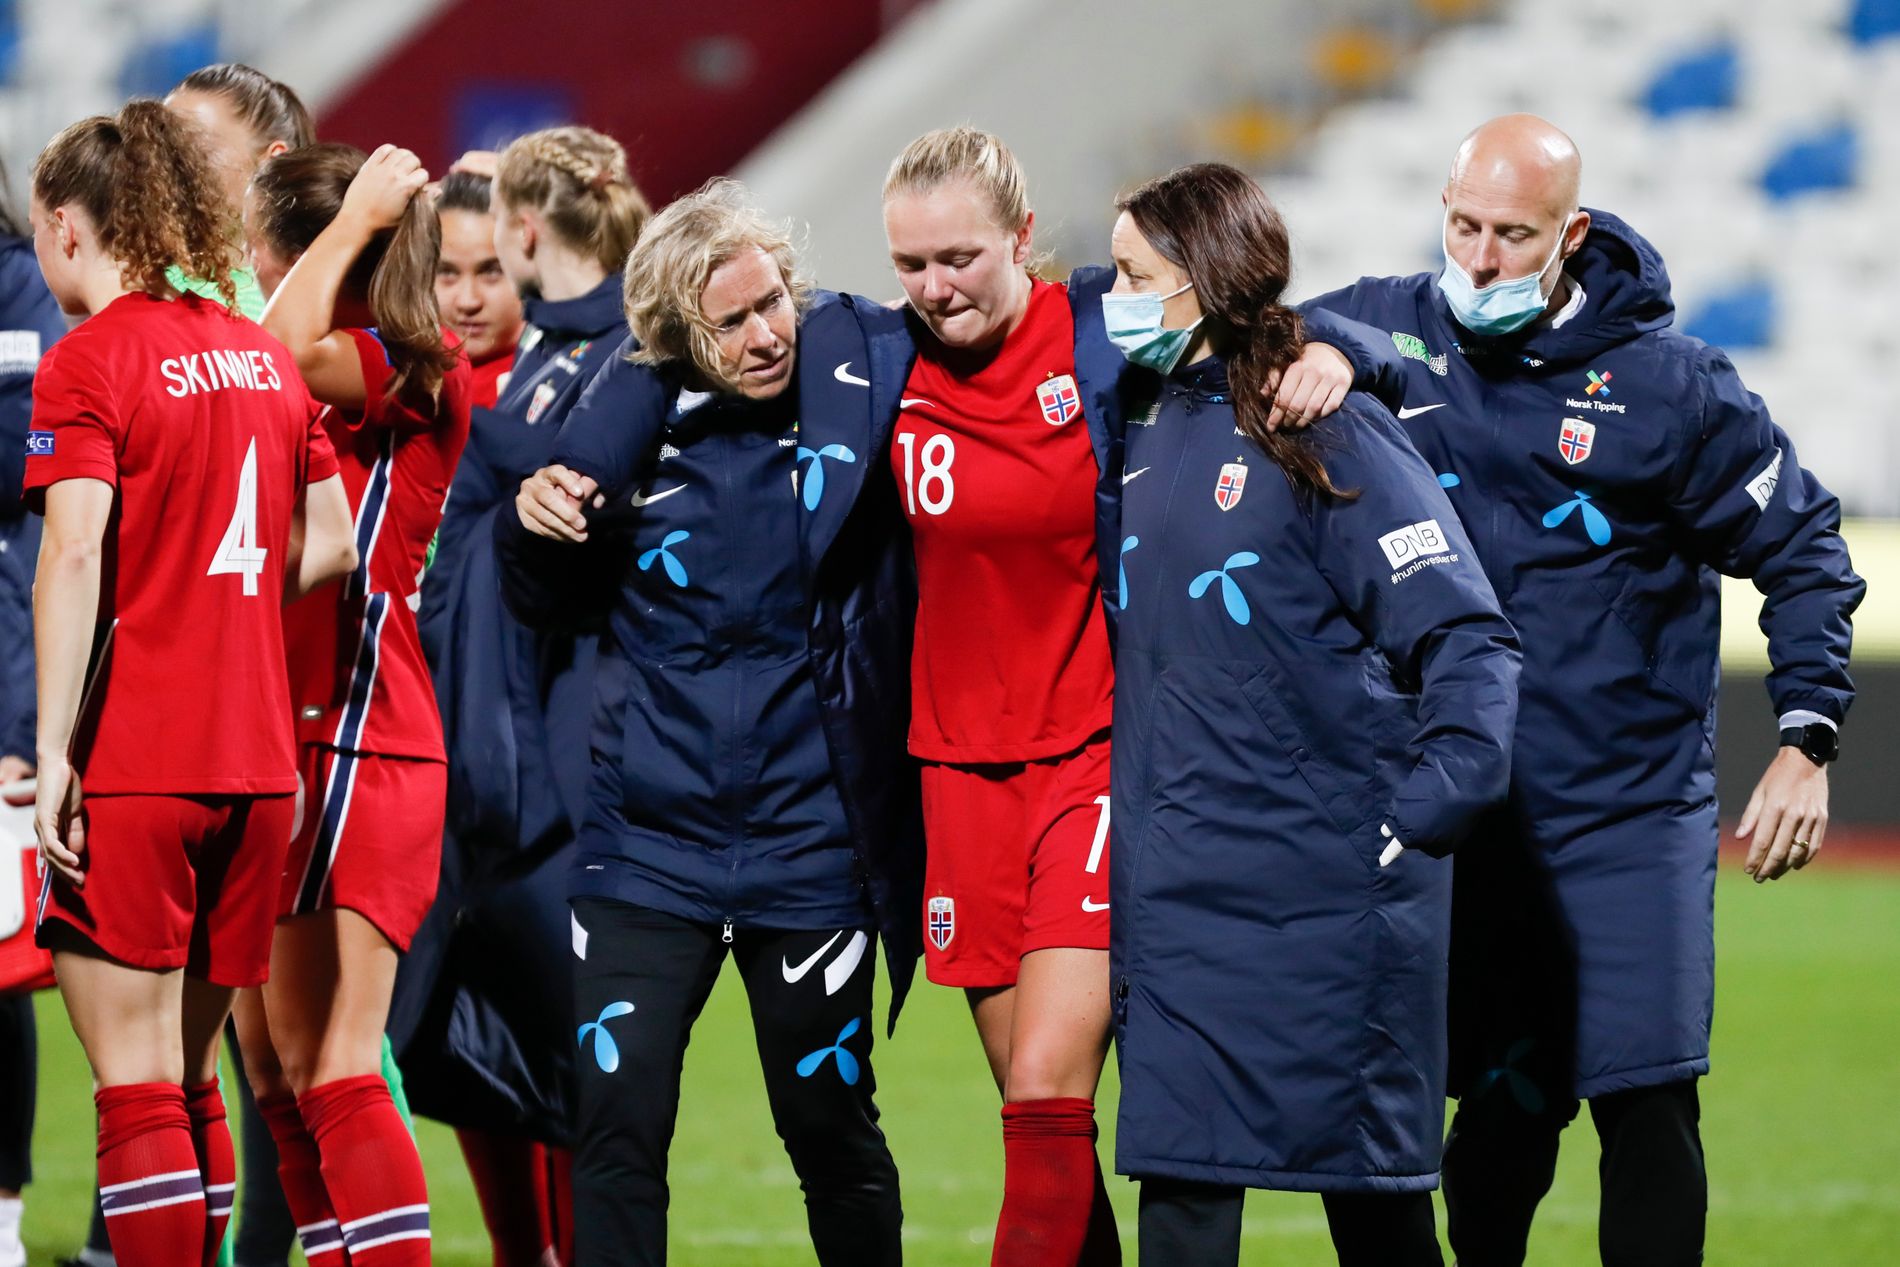 Fragments in Norway's Delight: Manum's Injury - VG